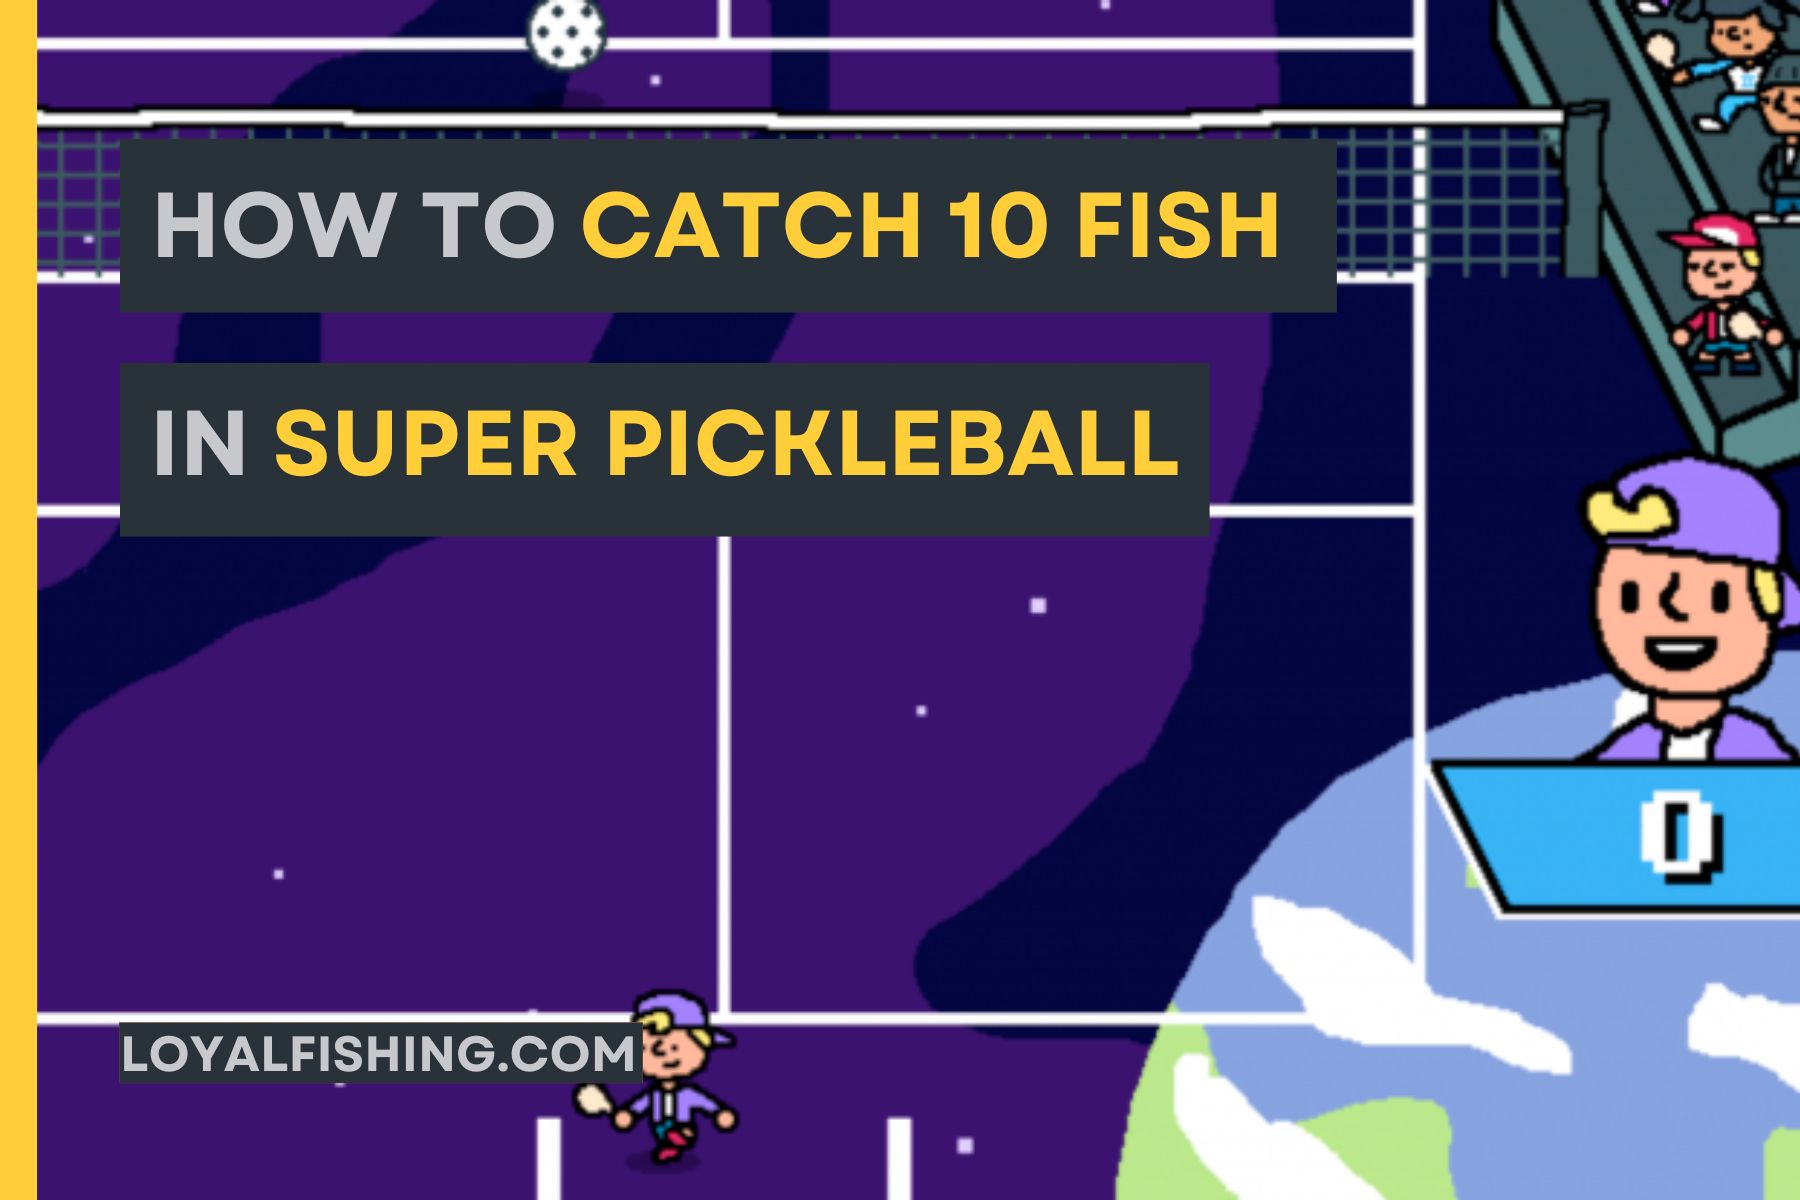 How to Catch 10 Fish in Super Pickleball